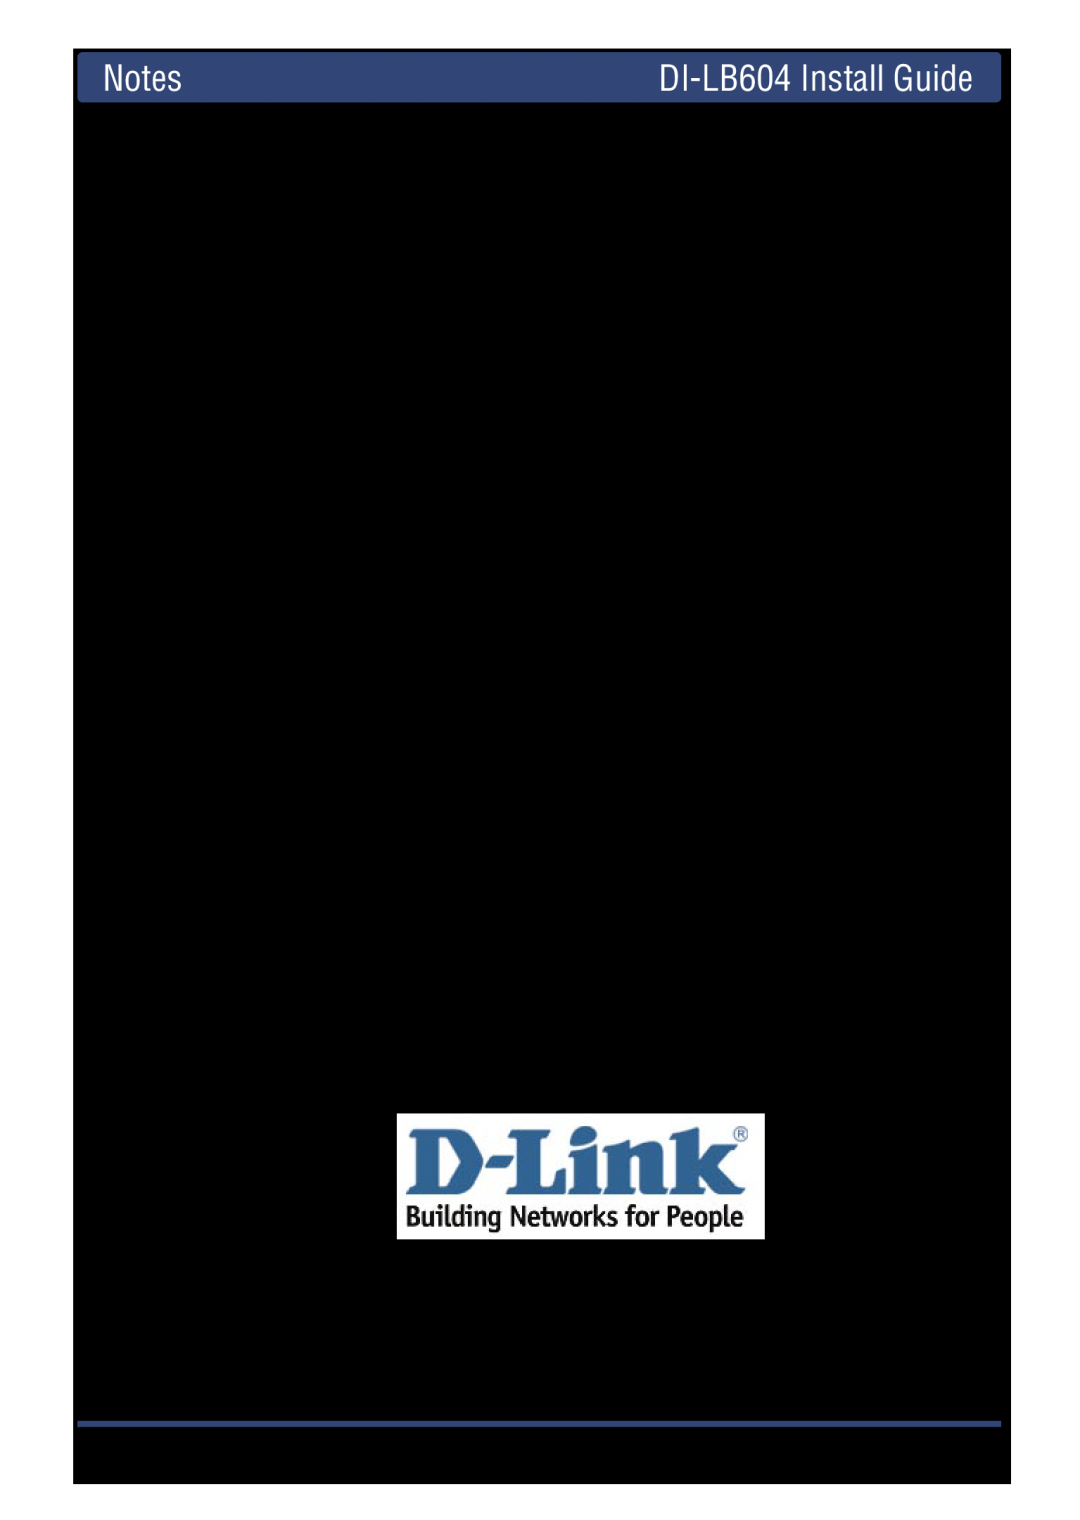 D-Link manual United States, Canada, NotesDI-LB604 Install Guide, Telephone, World Wide Web, E-mail, D-Link Systems, Inc 